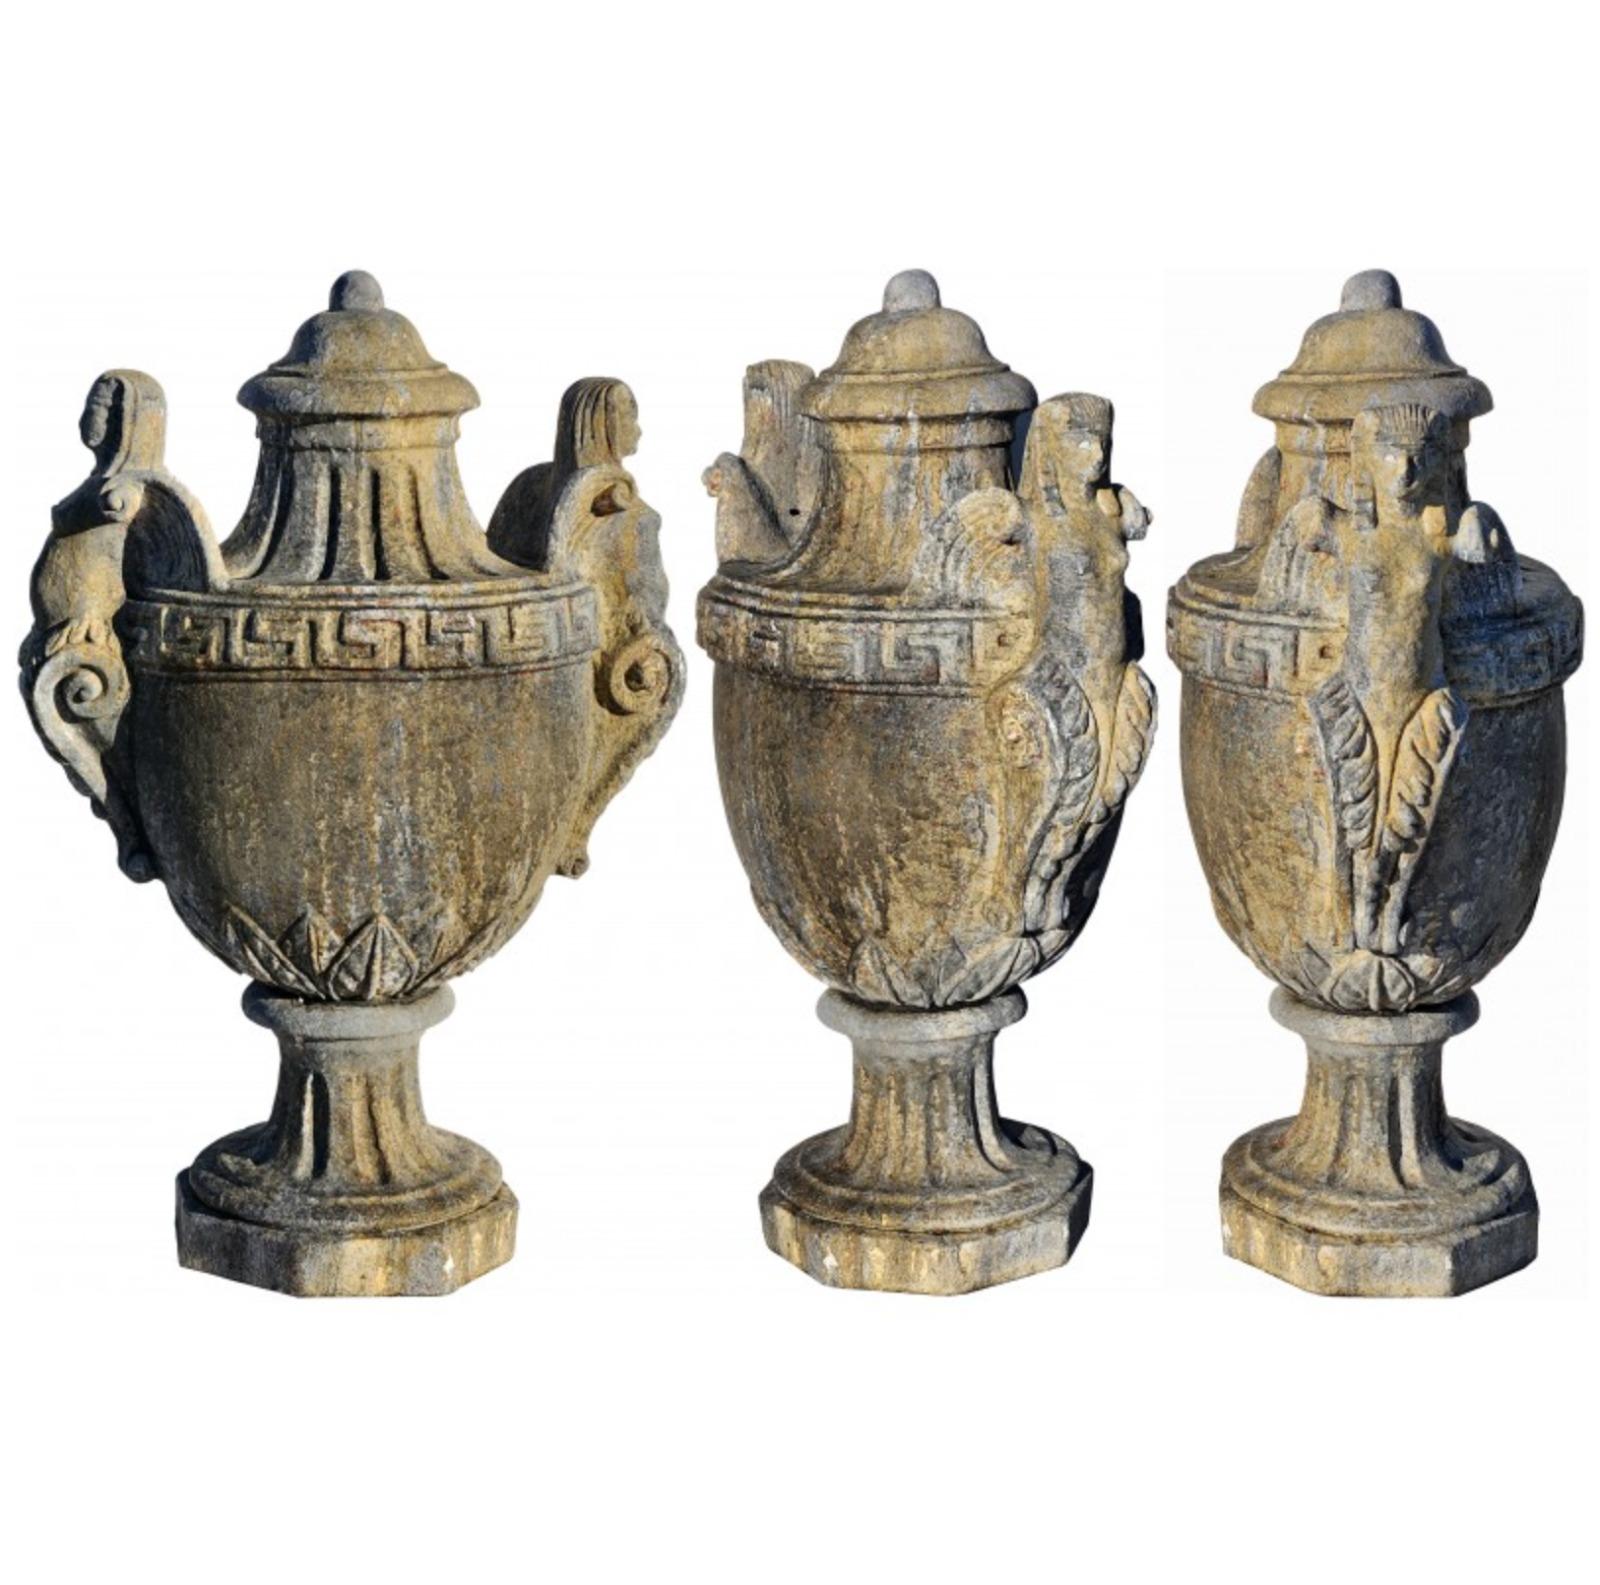 Hand-Crafted Empire Vase, Pillar Goblet with Sphinxes End 19th Century For Sale